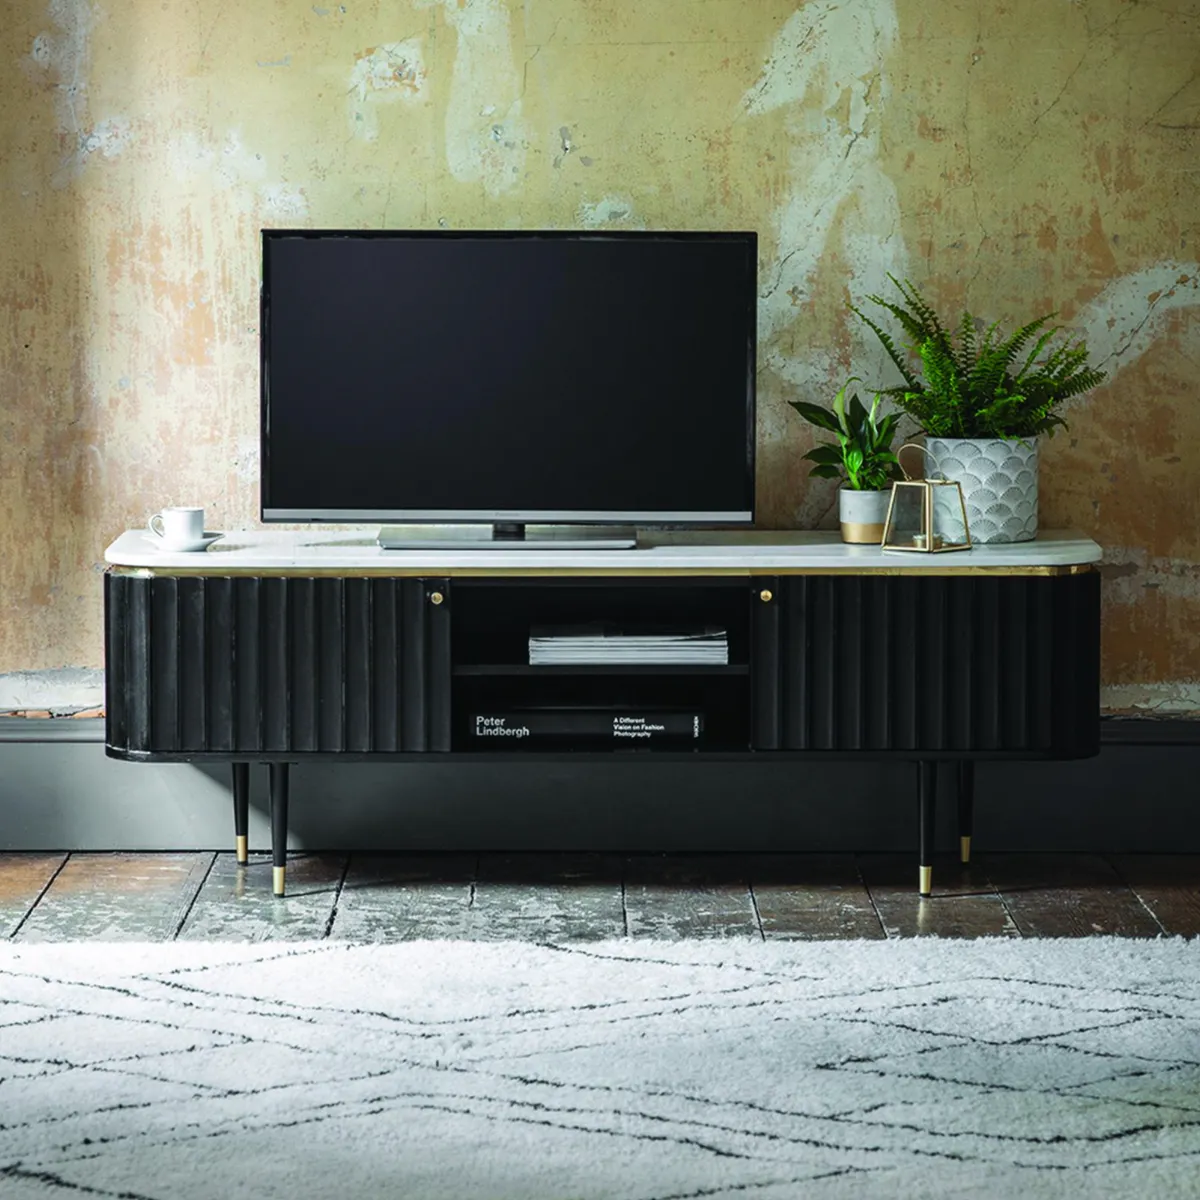 Fluted finishes add texture and depth to a space. Pair with luxurious materials such as brass and marble for a luxury look Black Flute marble media unit, £549, Atkin & Thyme